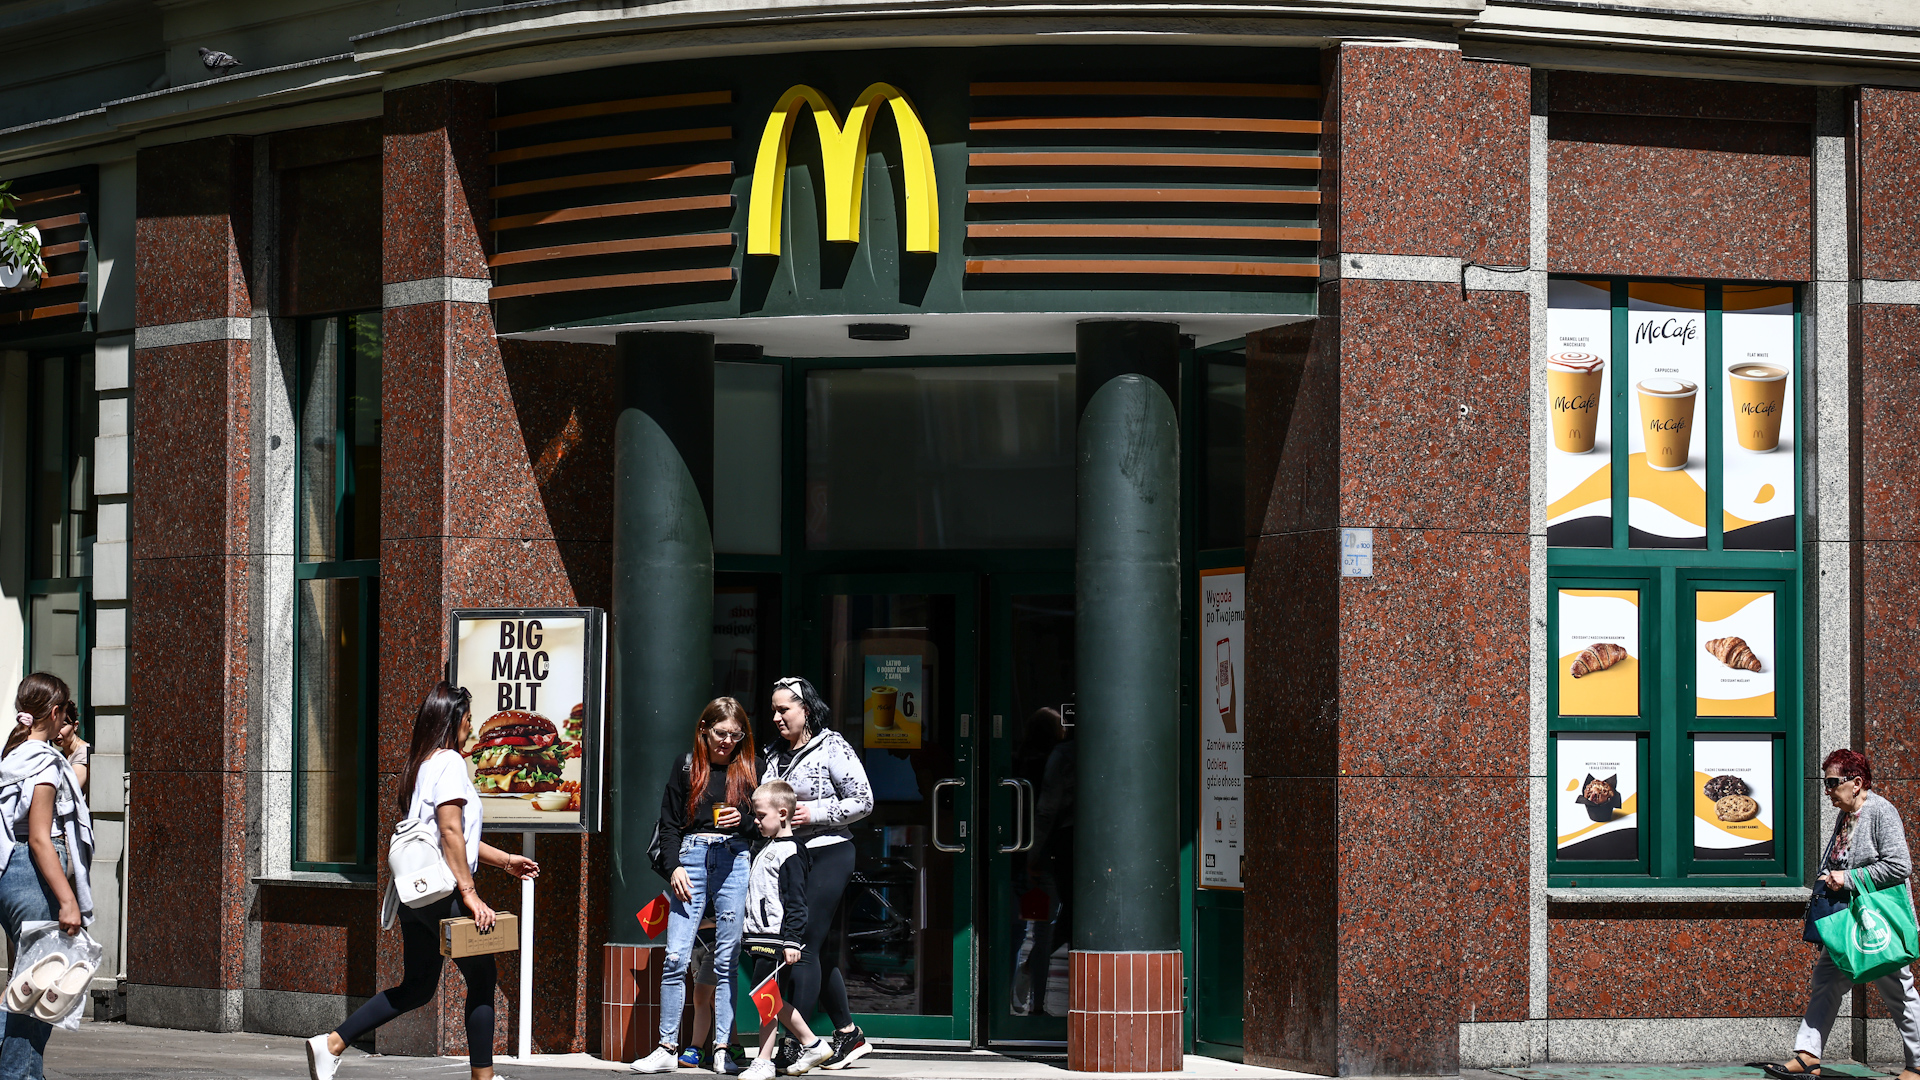 McDonald's introduces the Grandma McFlurry to win back customers amid rising prices and plans for a  value meal.